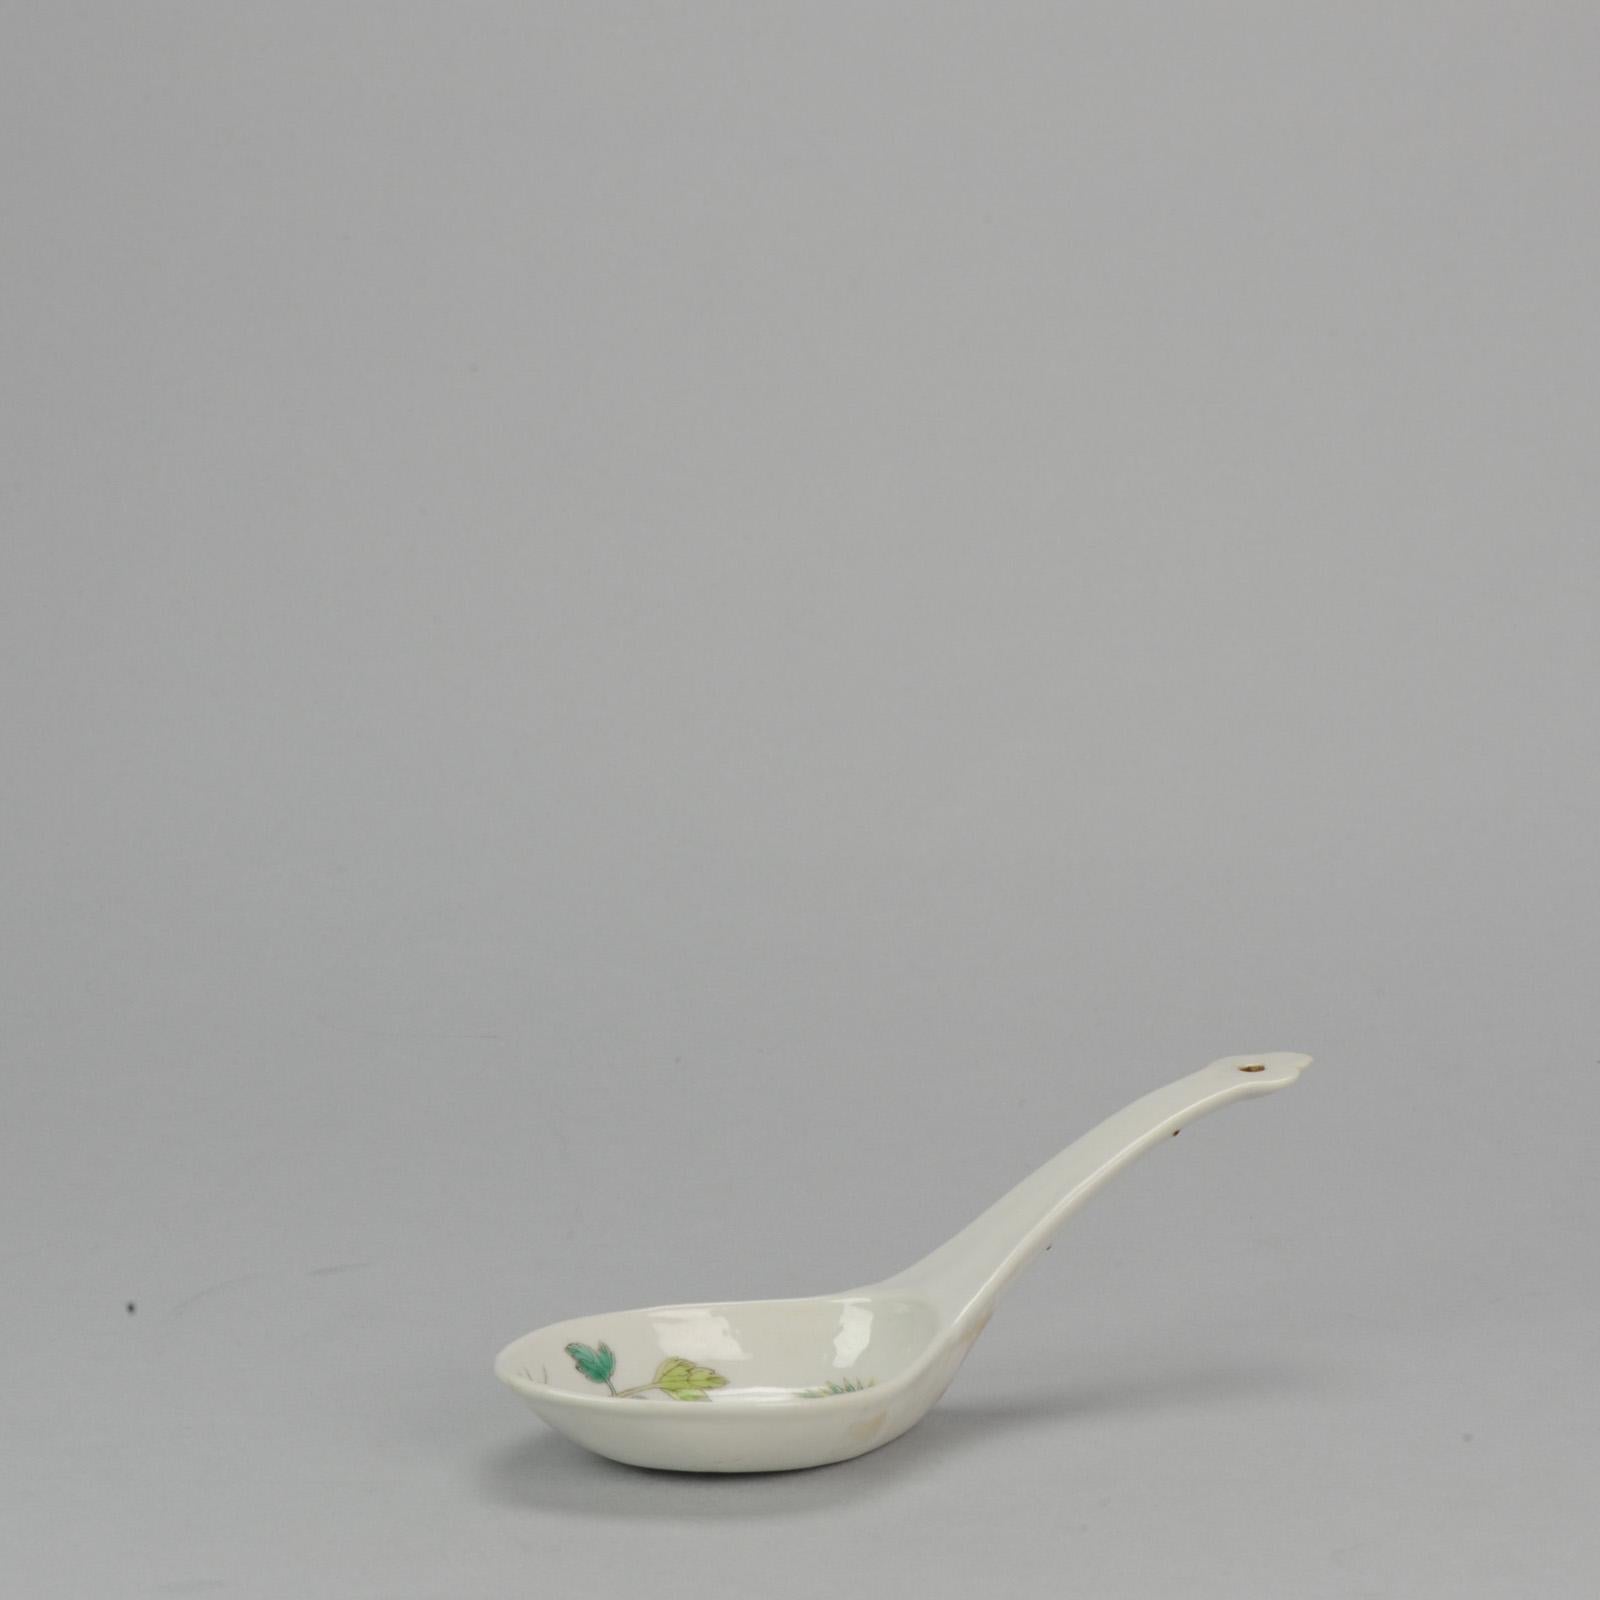 Antique Republic Chinese Porcelain Large Spoon Qianlong Marked, 19th/20th Cen In Good Condition For Sale In Amsterdam, Noord Holland